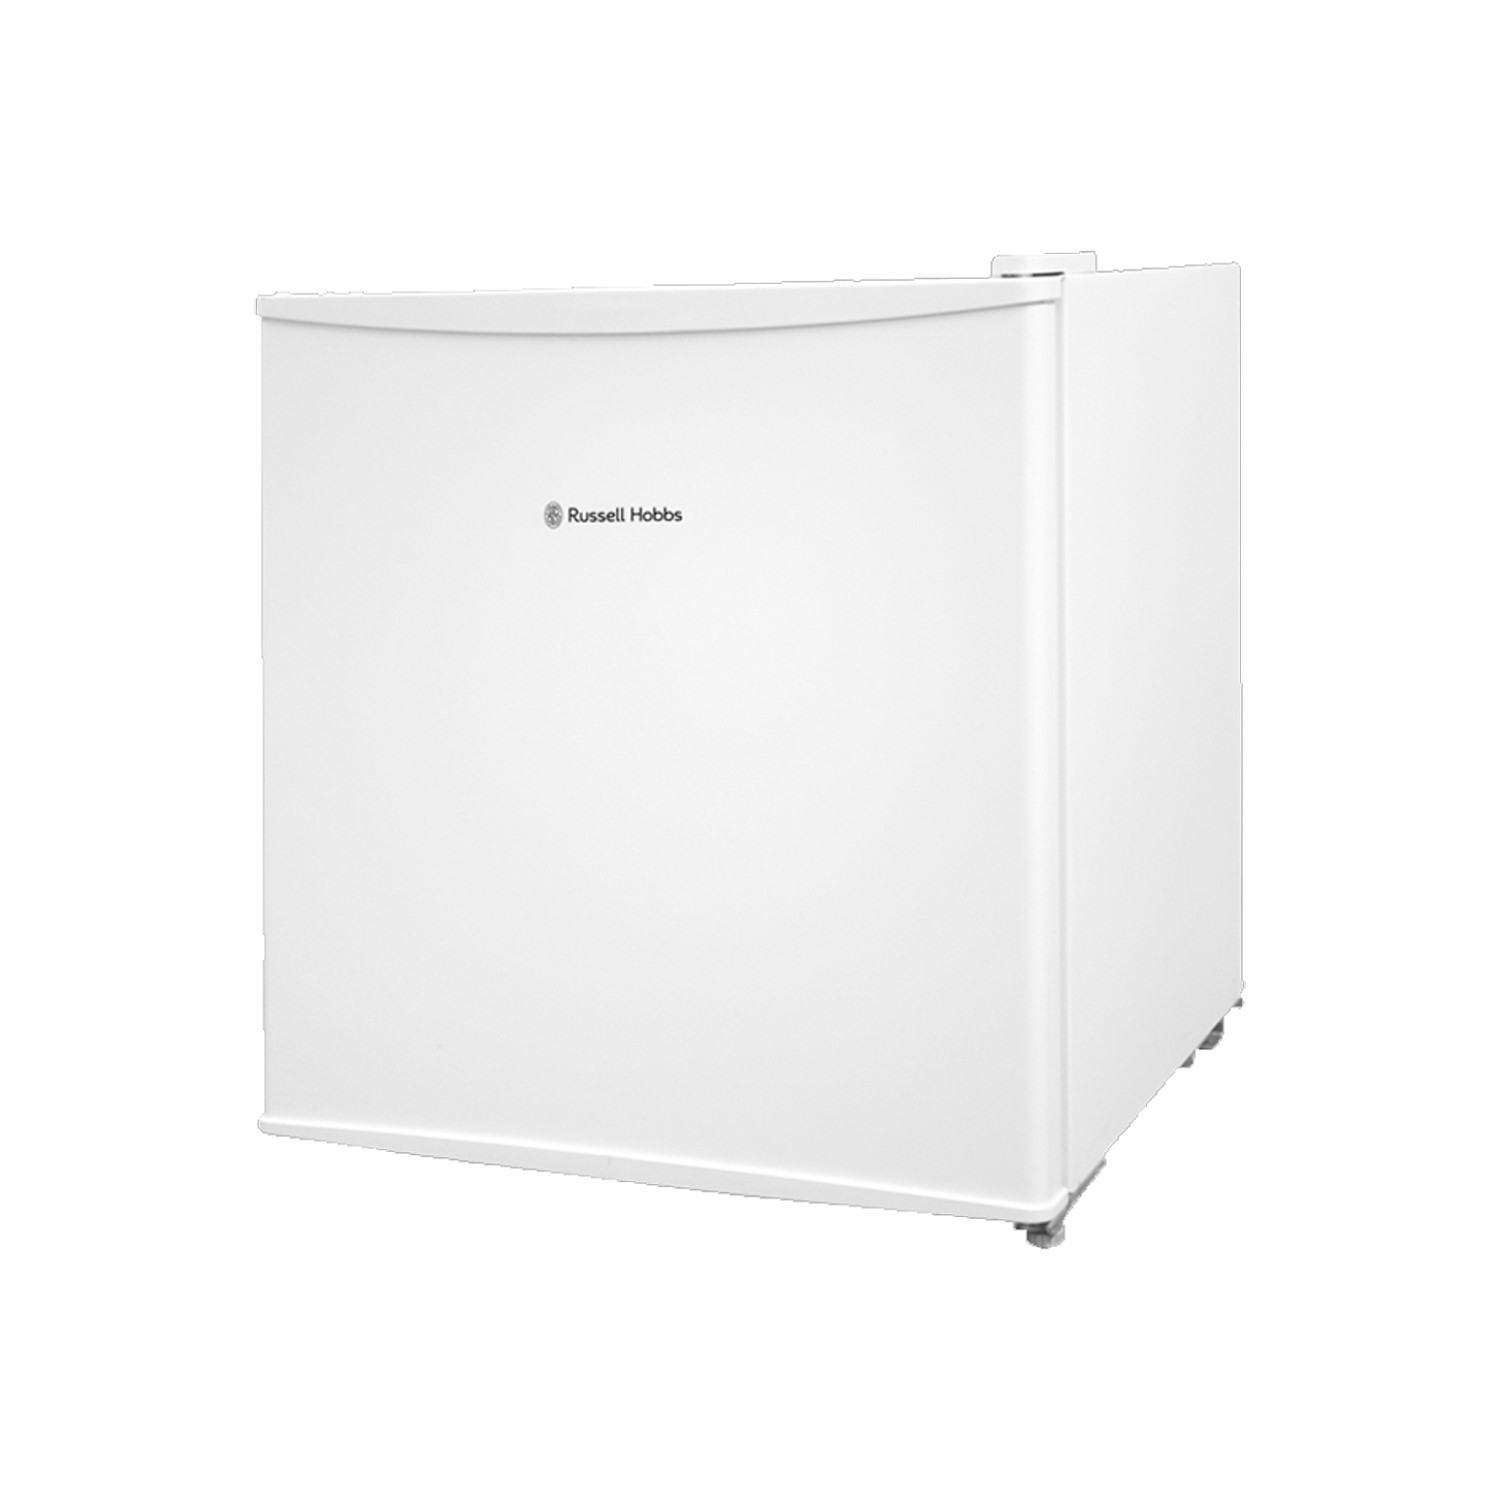 Russell Hobbs 43 Litre Wide Compact Table Top Fridge - White